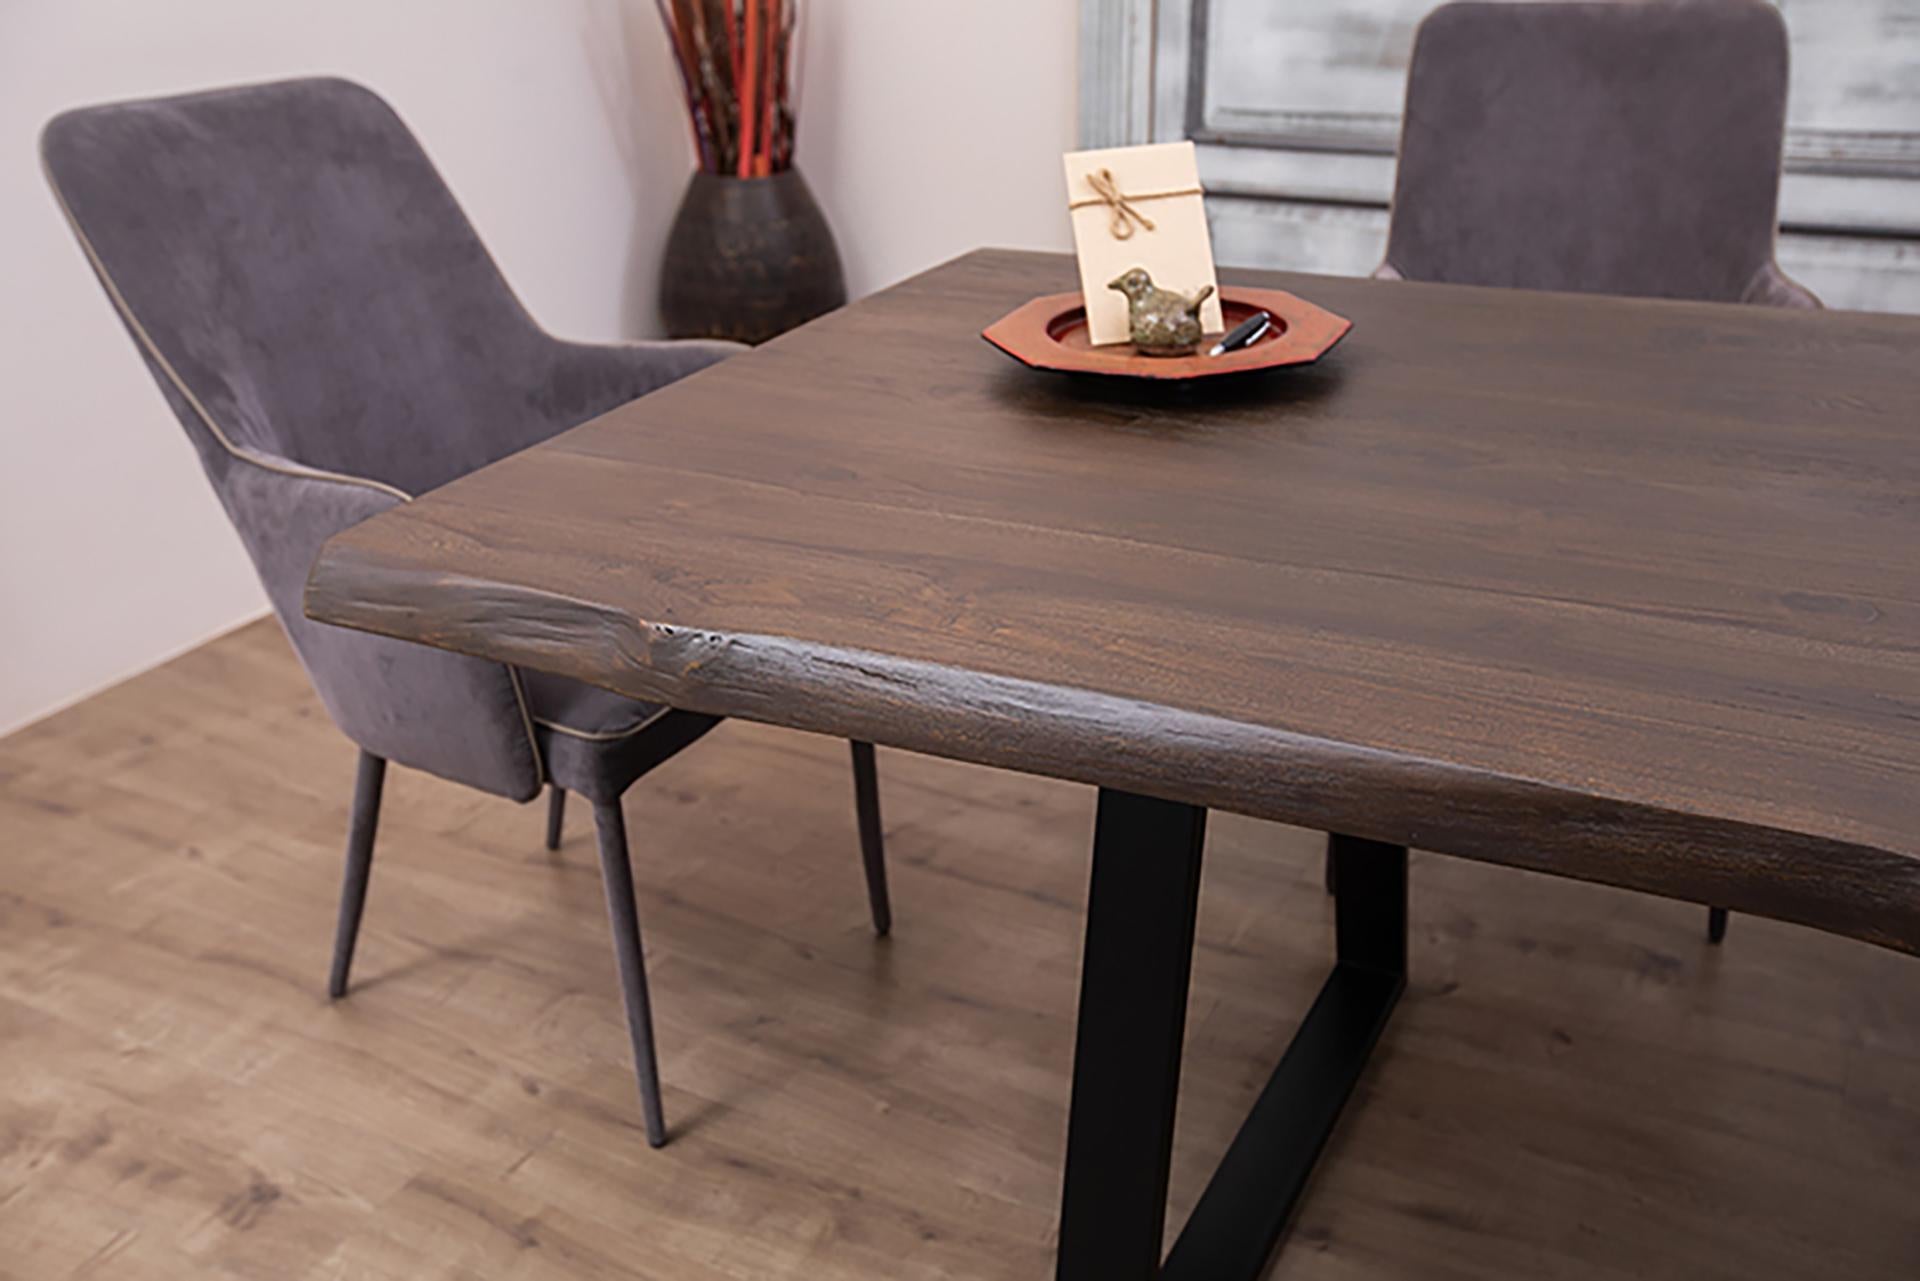 Hand-Crafted 100% Solid Live Edge Teak Dining Table with Metal Legs